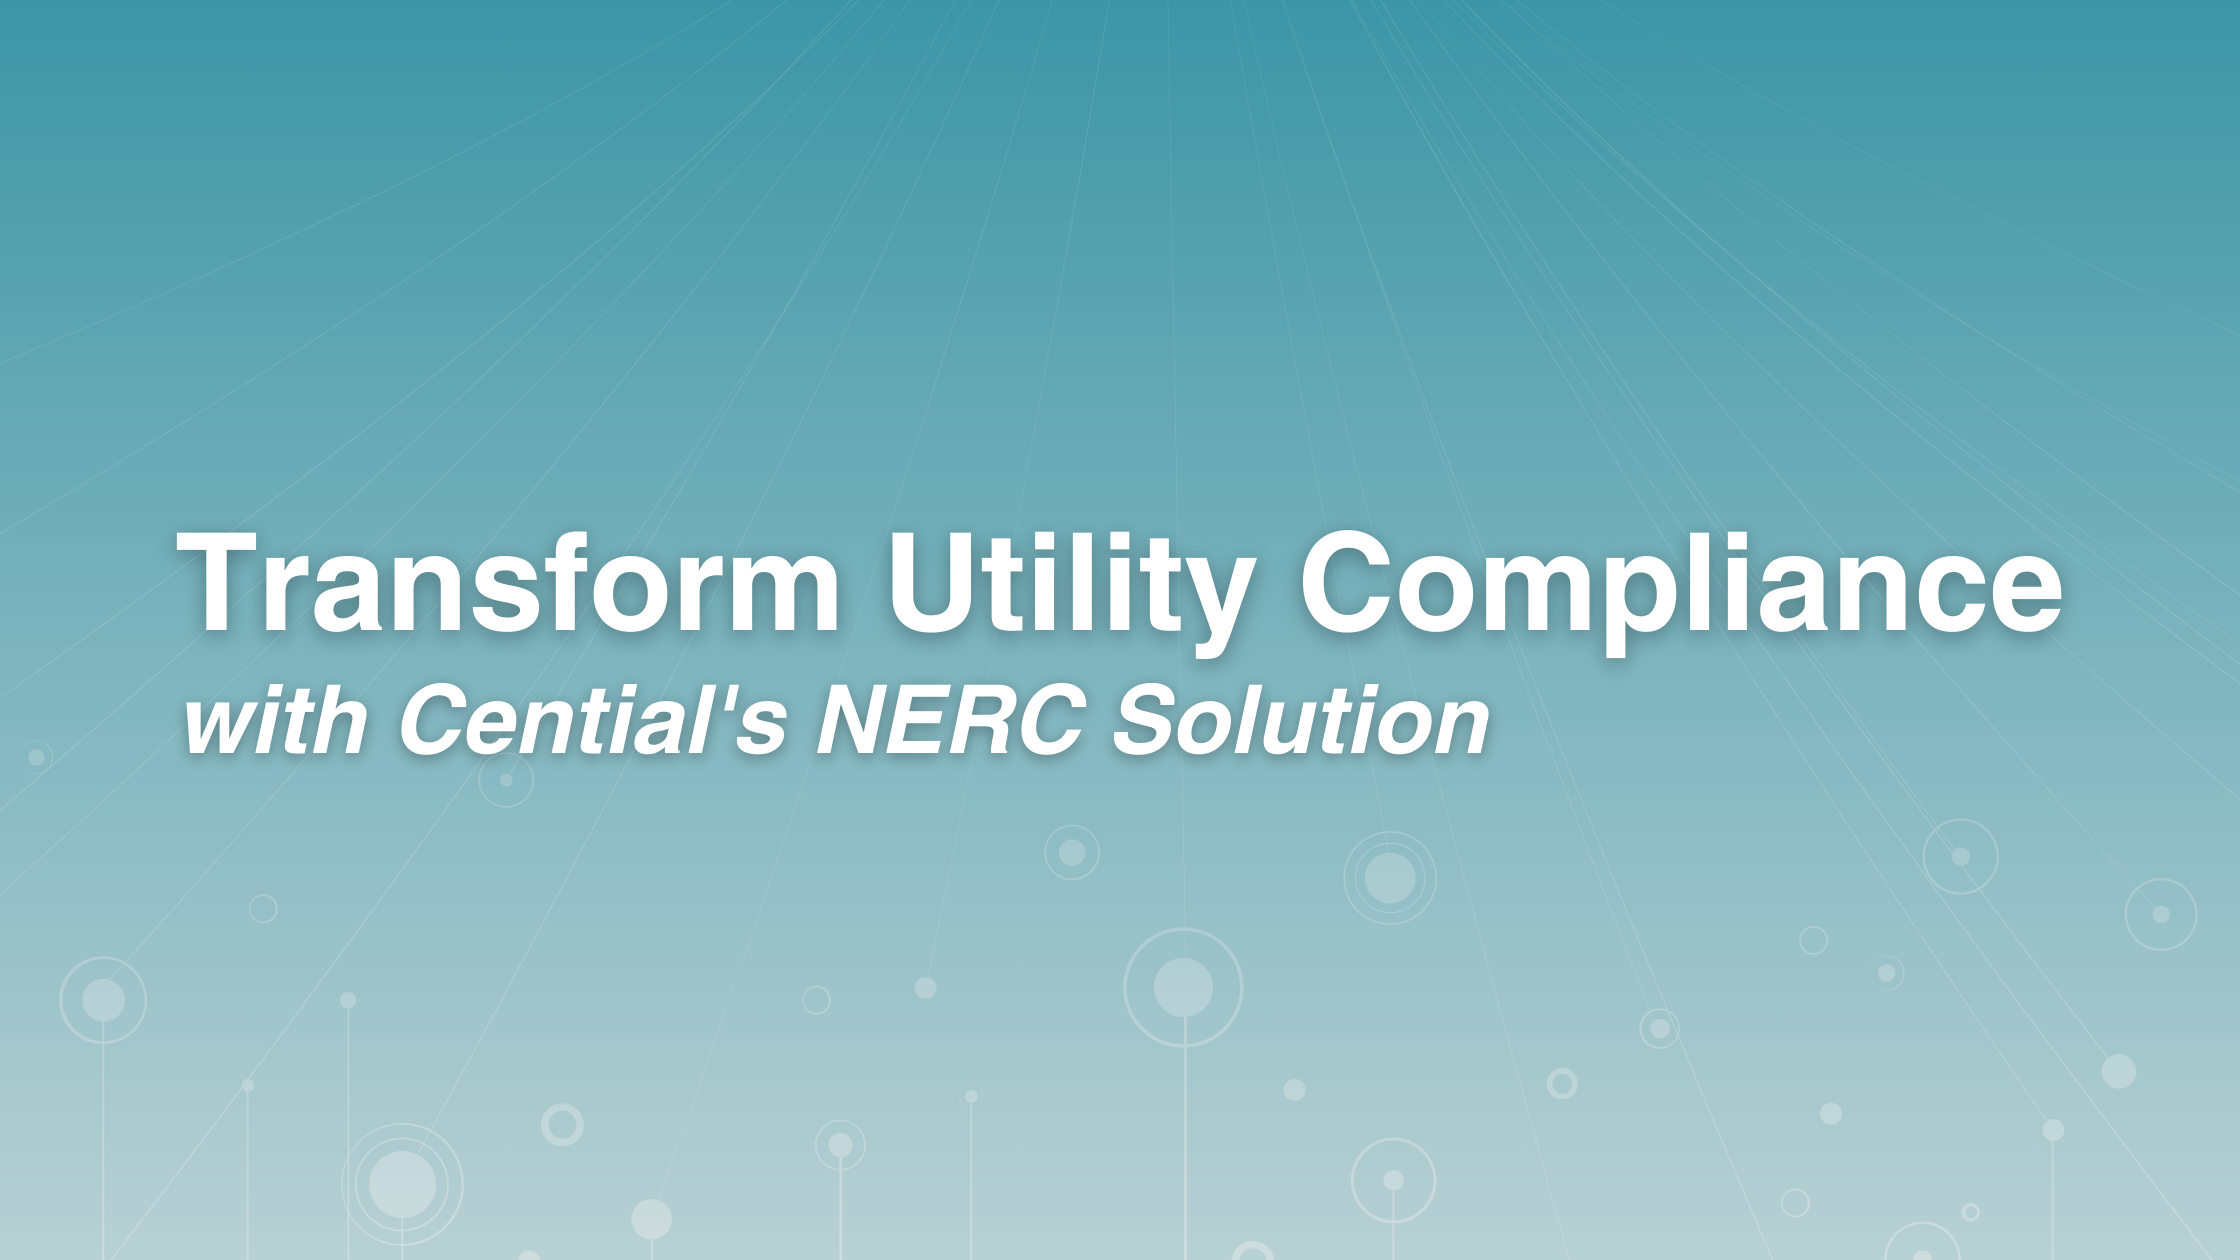 Transform Utility Compliance with Cential's NERC Solution Enhanced by Onspring